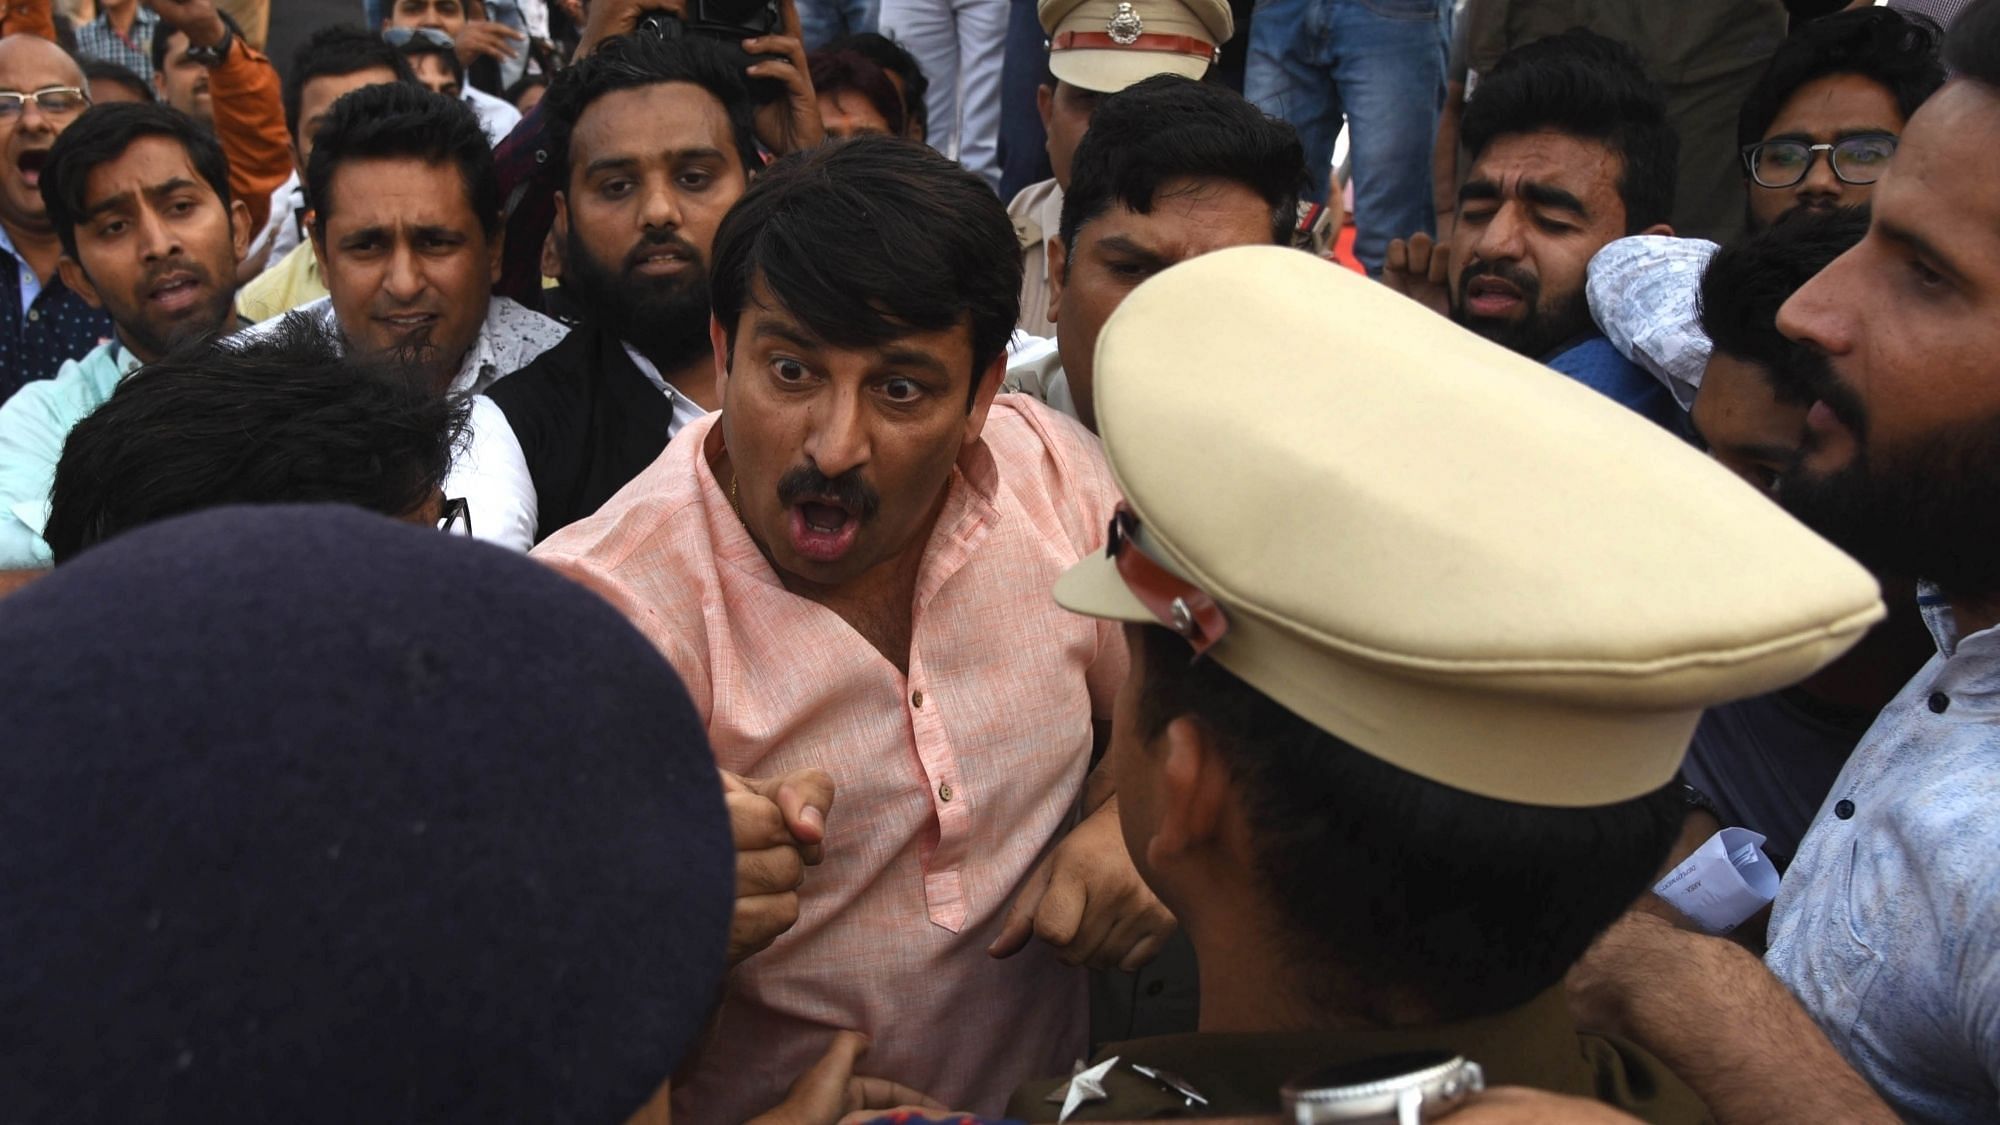 Delhi BJP chief Manoj Tiwari argues with the police during a scuffle with Aam Aadmi Party (AAP) workers at the inauguration of the Signature Bridge over Yamuna river, in New Delhi on 4 November, 2018.